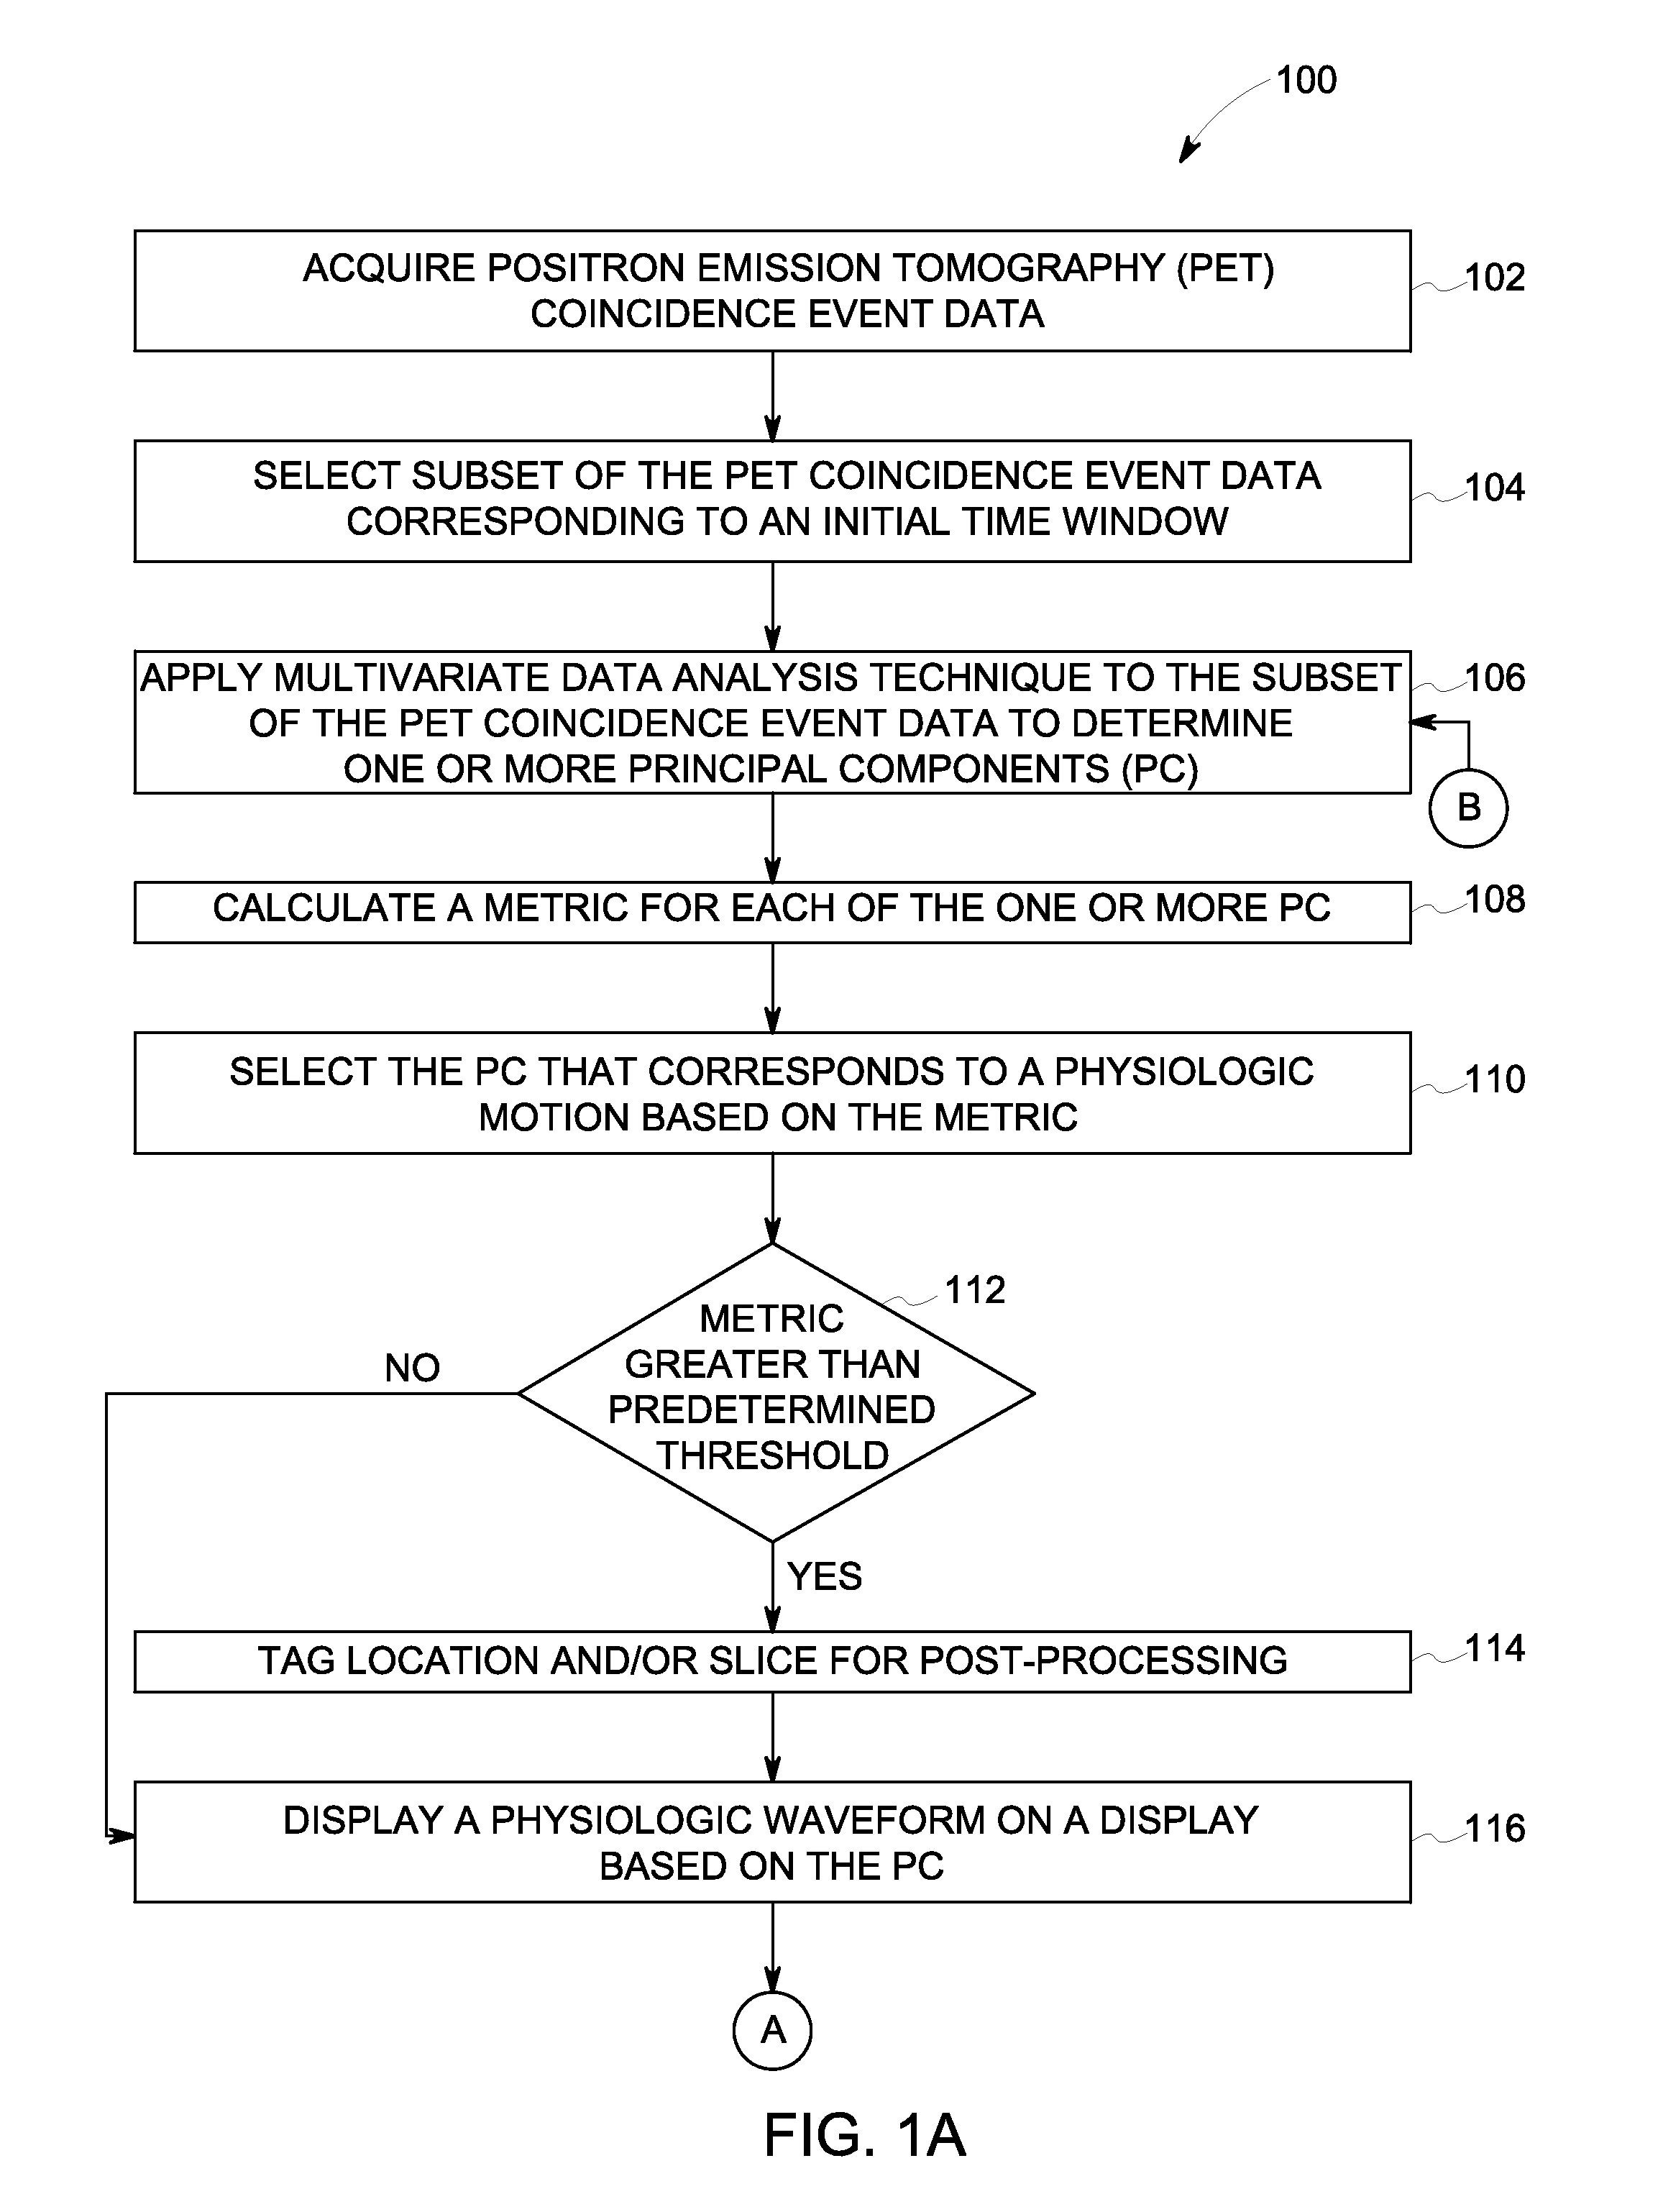 Systems and methods for displaying a physiologic waveform